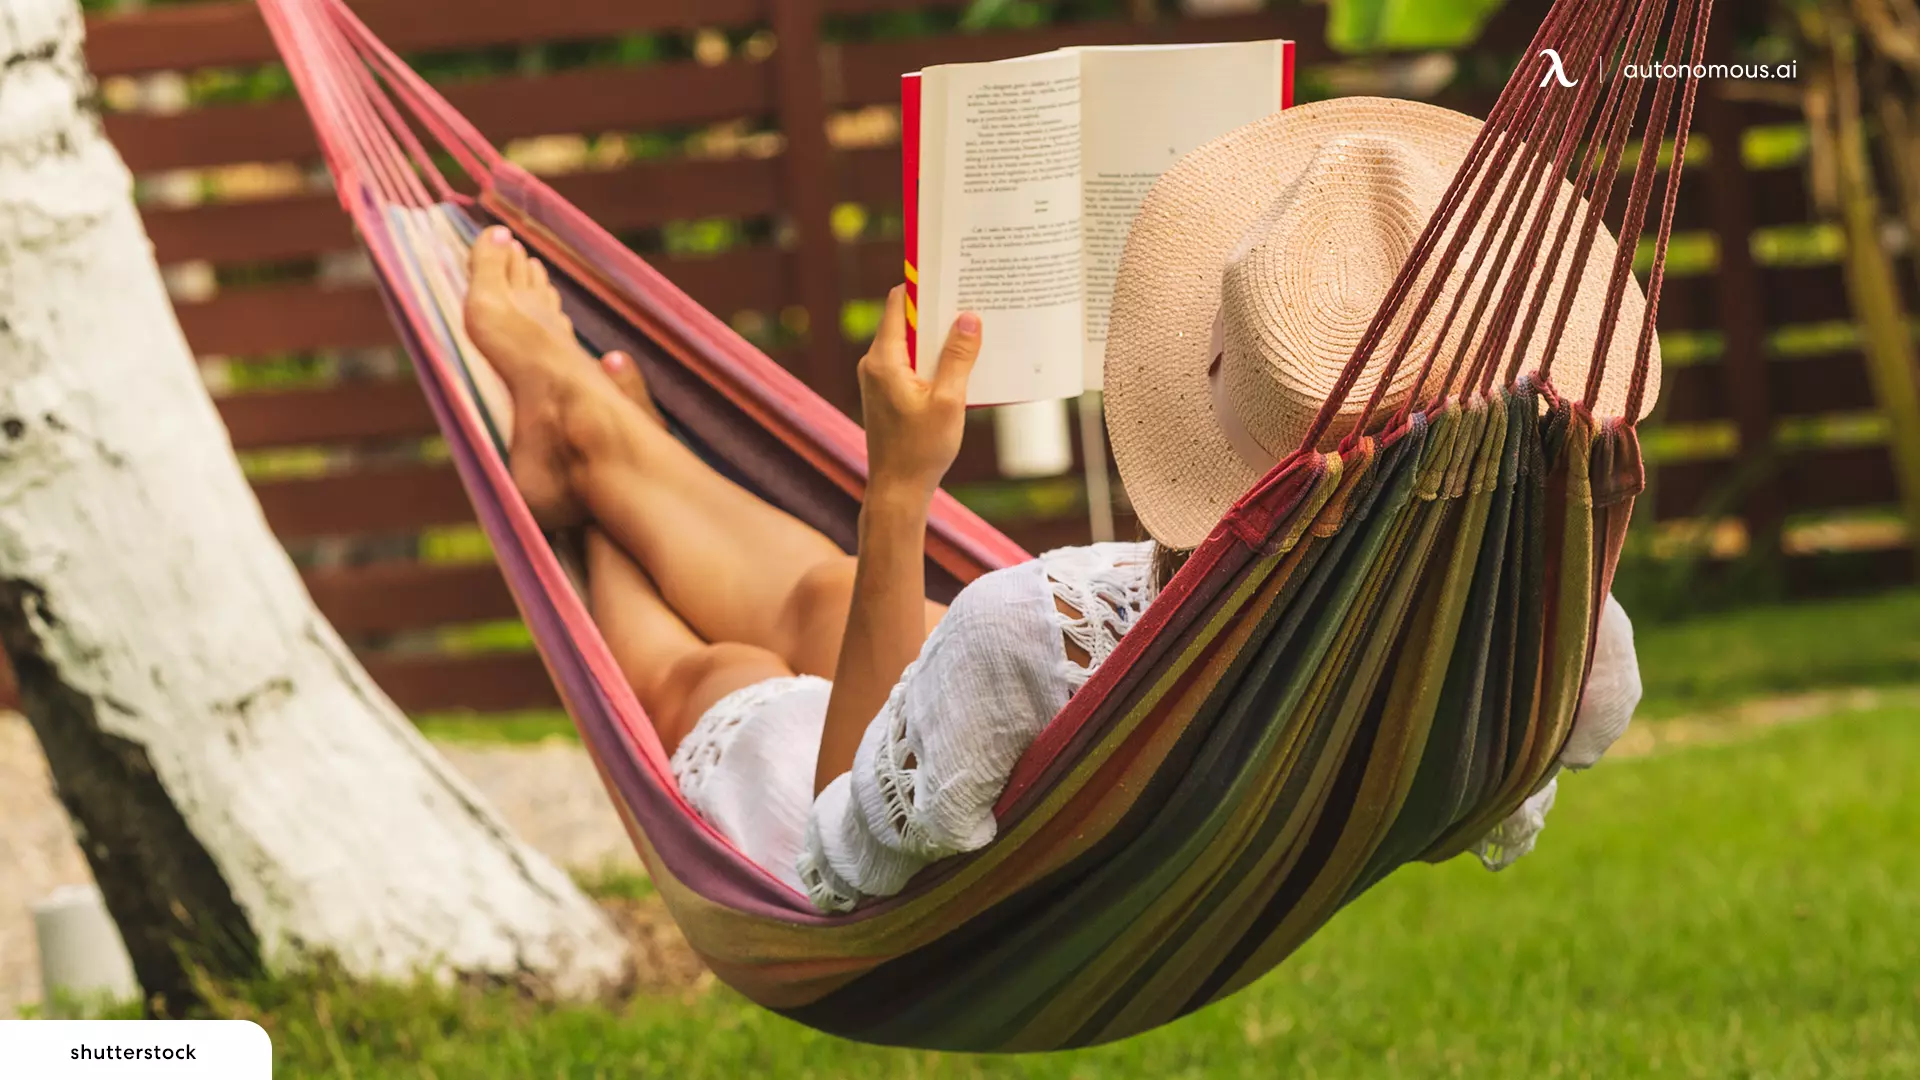 Make Your Backyard More Relaxing With a Hammock